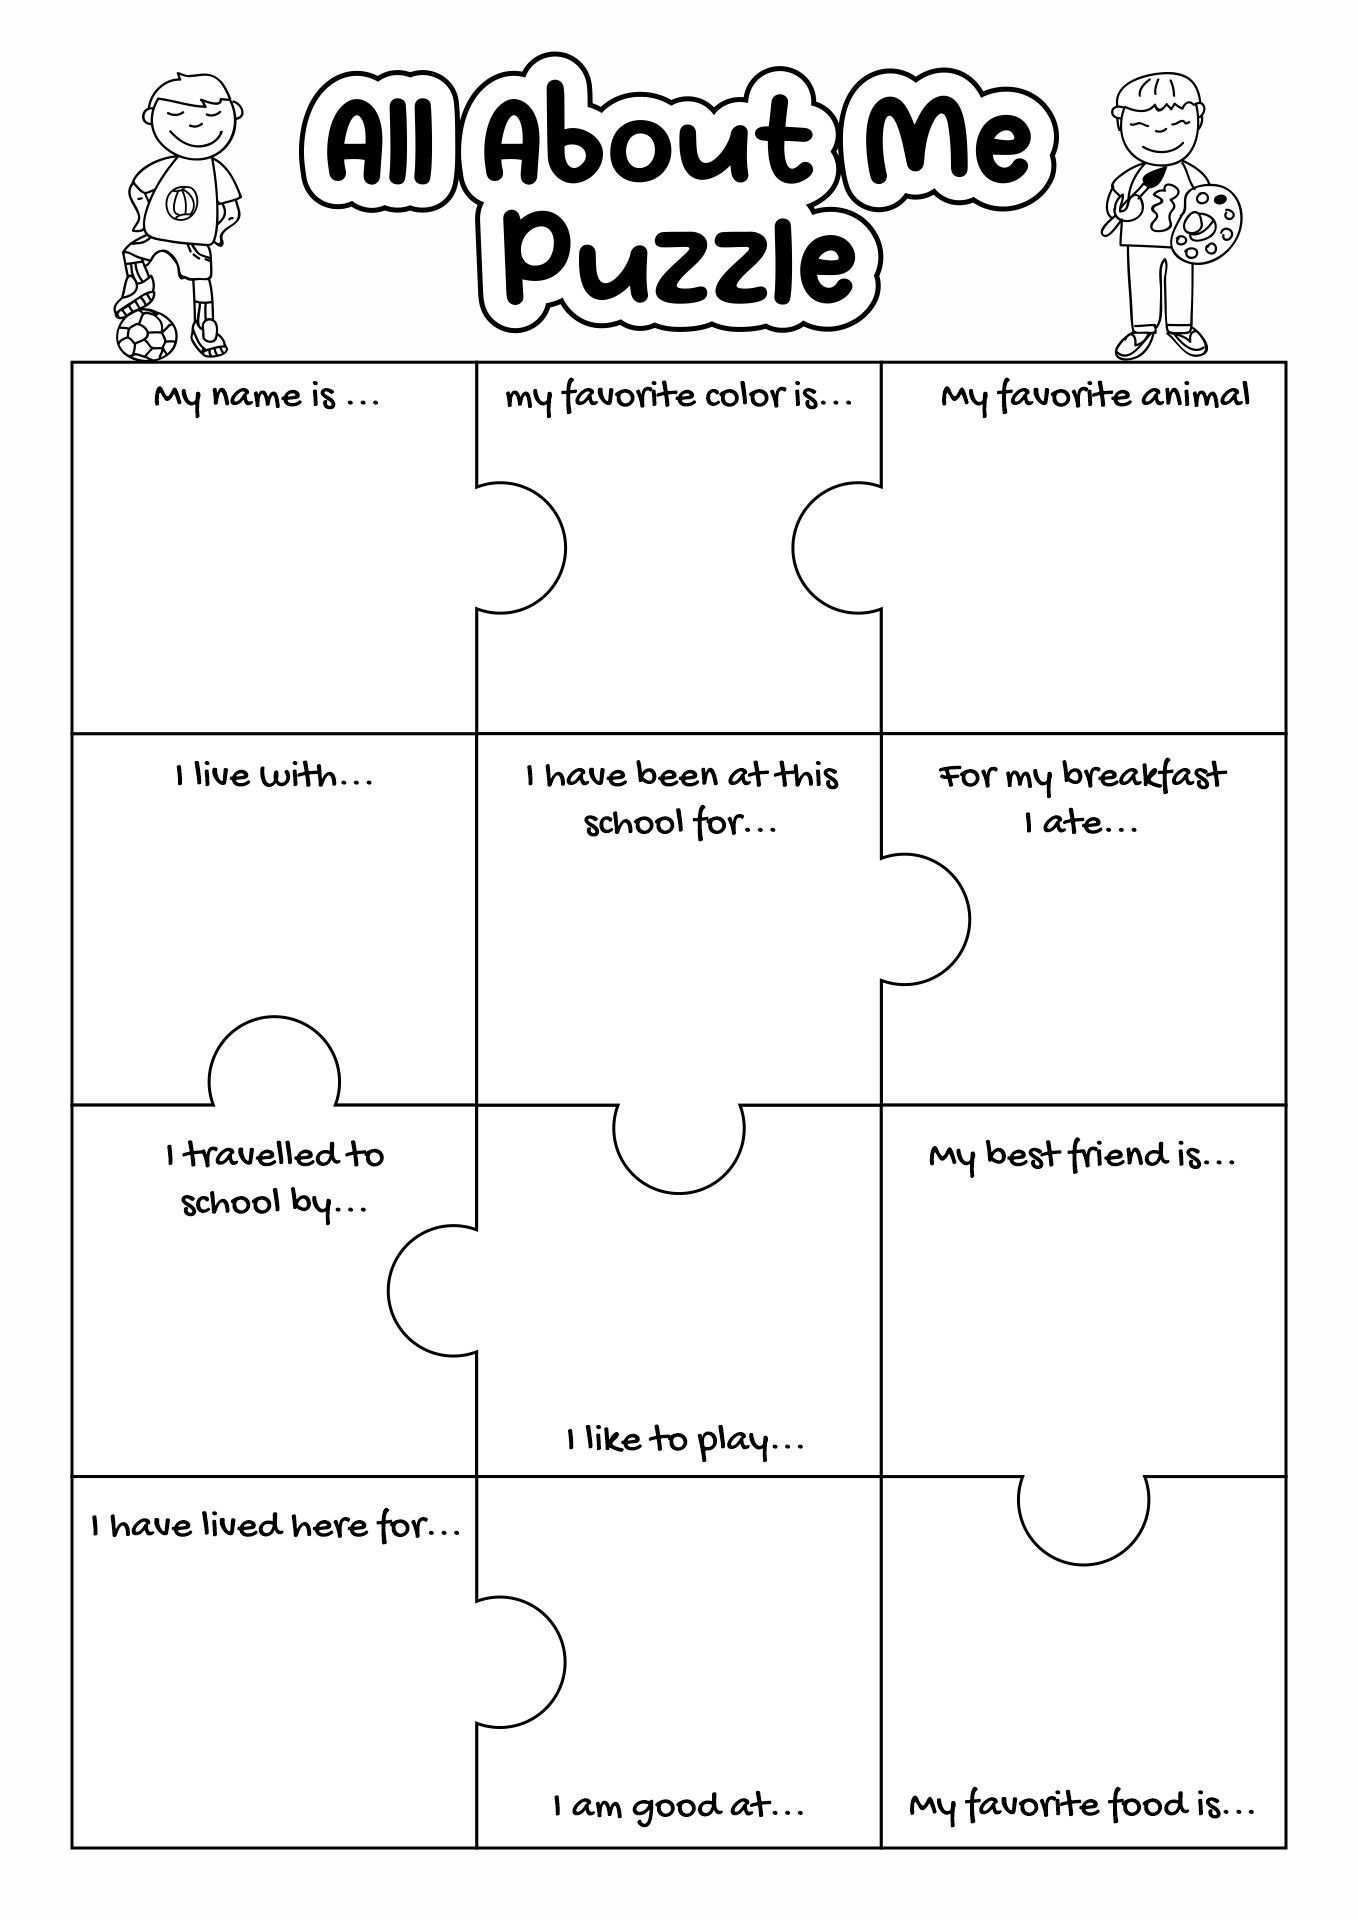 All About Me Puzzle First Days of School Image